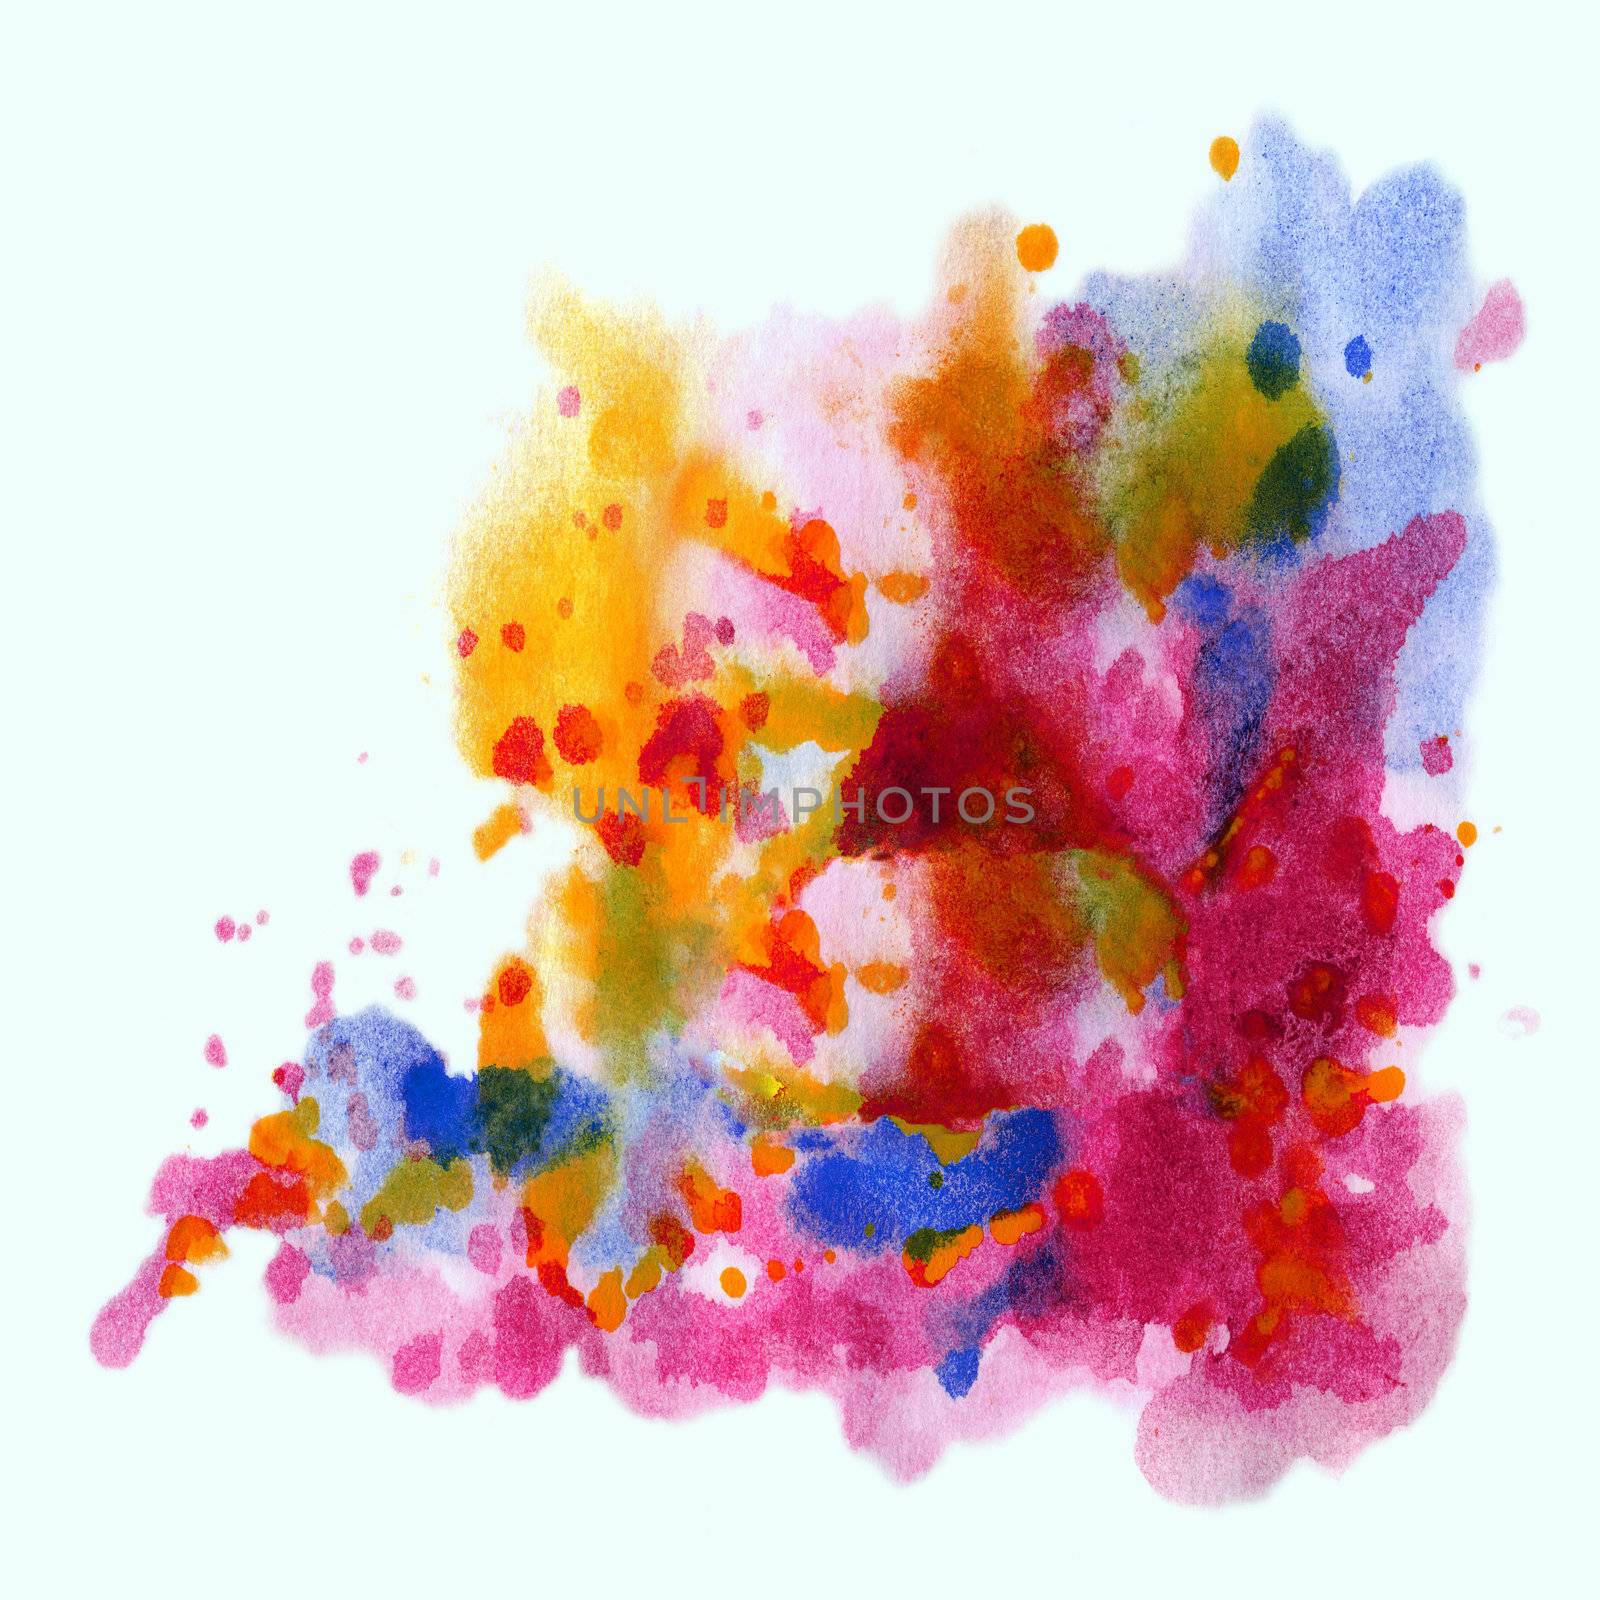 Abstract background, watercolor, beautiful hand painted on a paper. Red, yellow, blue, violet